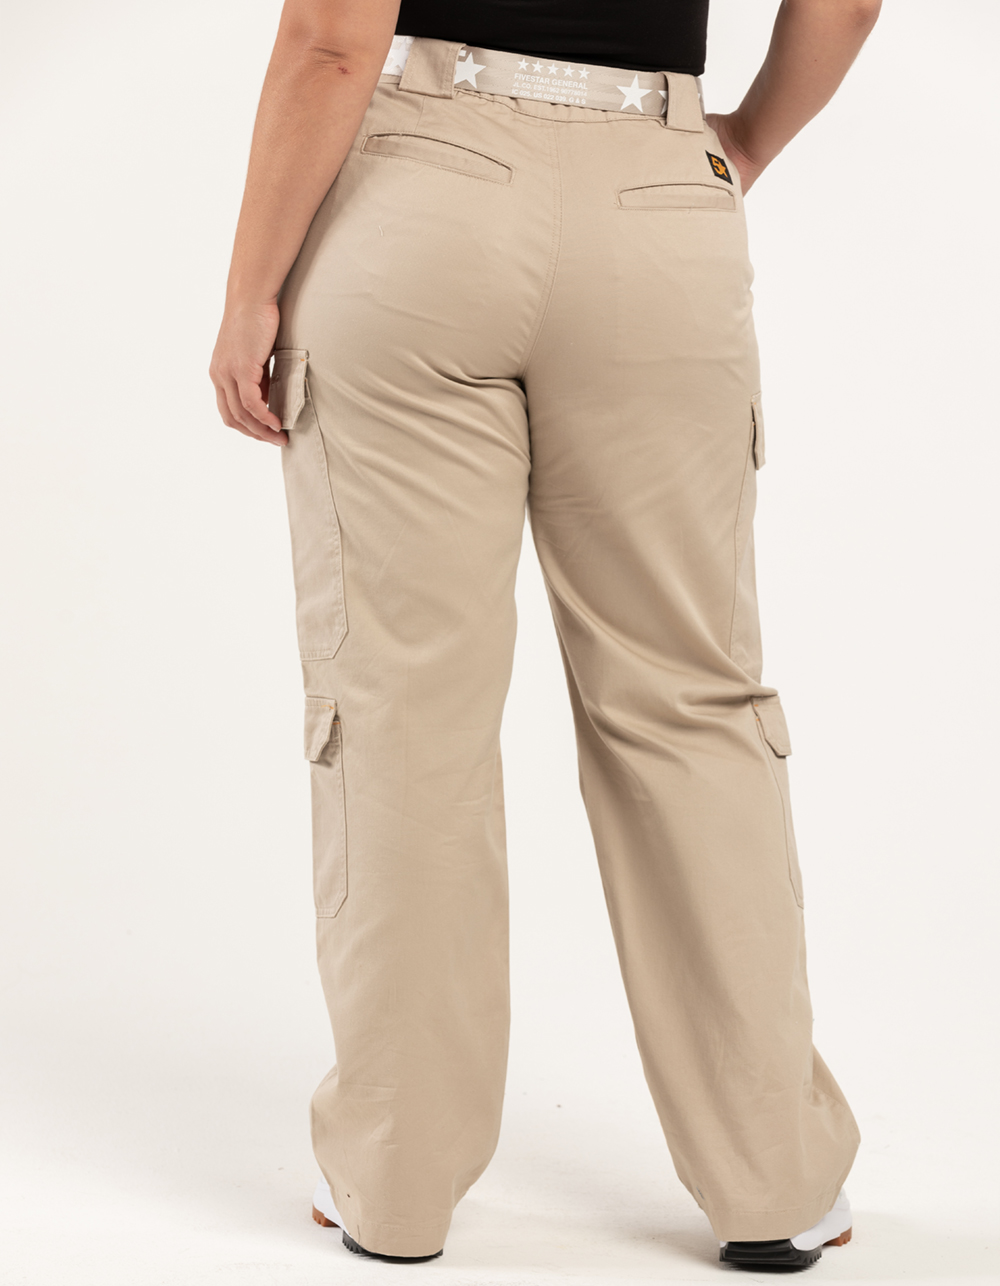 Women's Insect Repellent Cargo Pants | Best-Selling Pants for Women –  Insect Shield